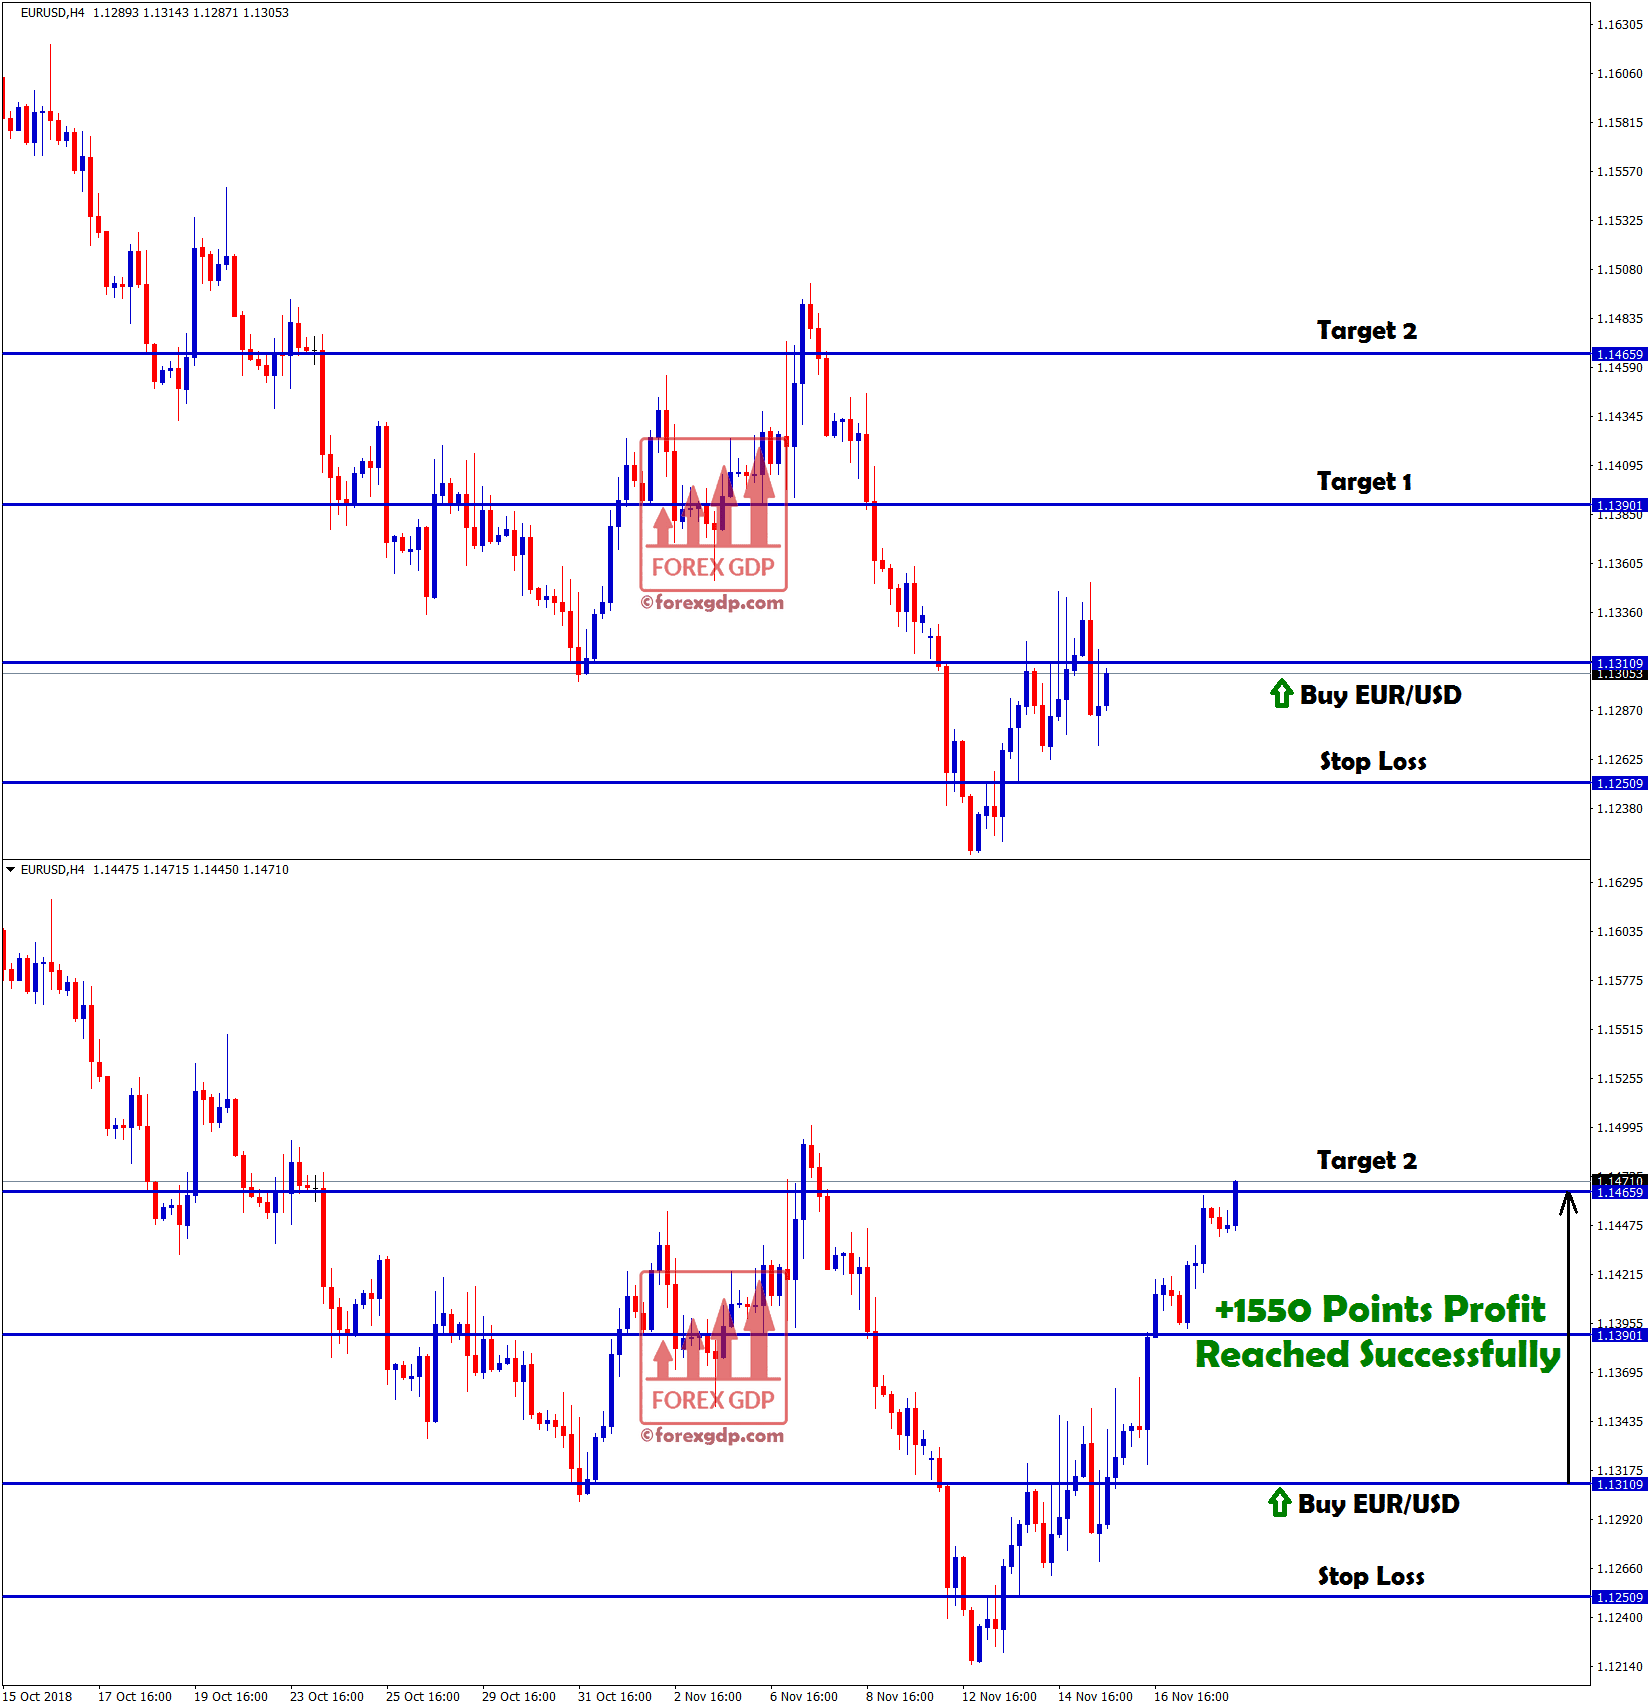 eurusd hits target with +1550 points profit